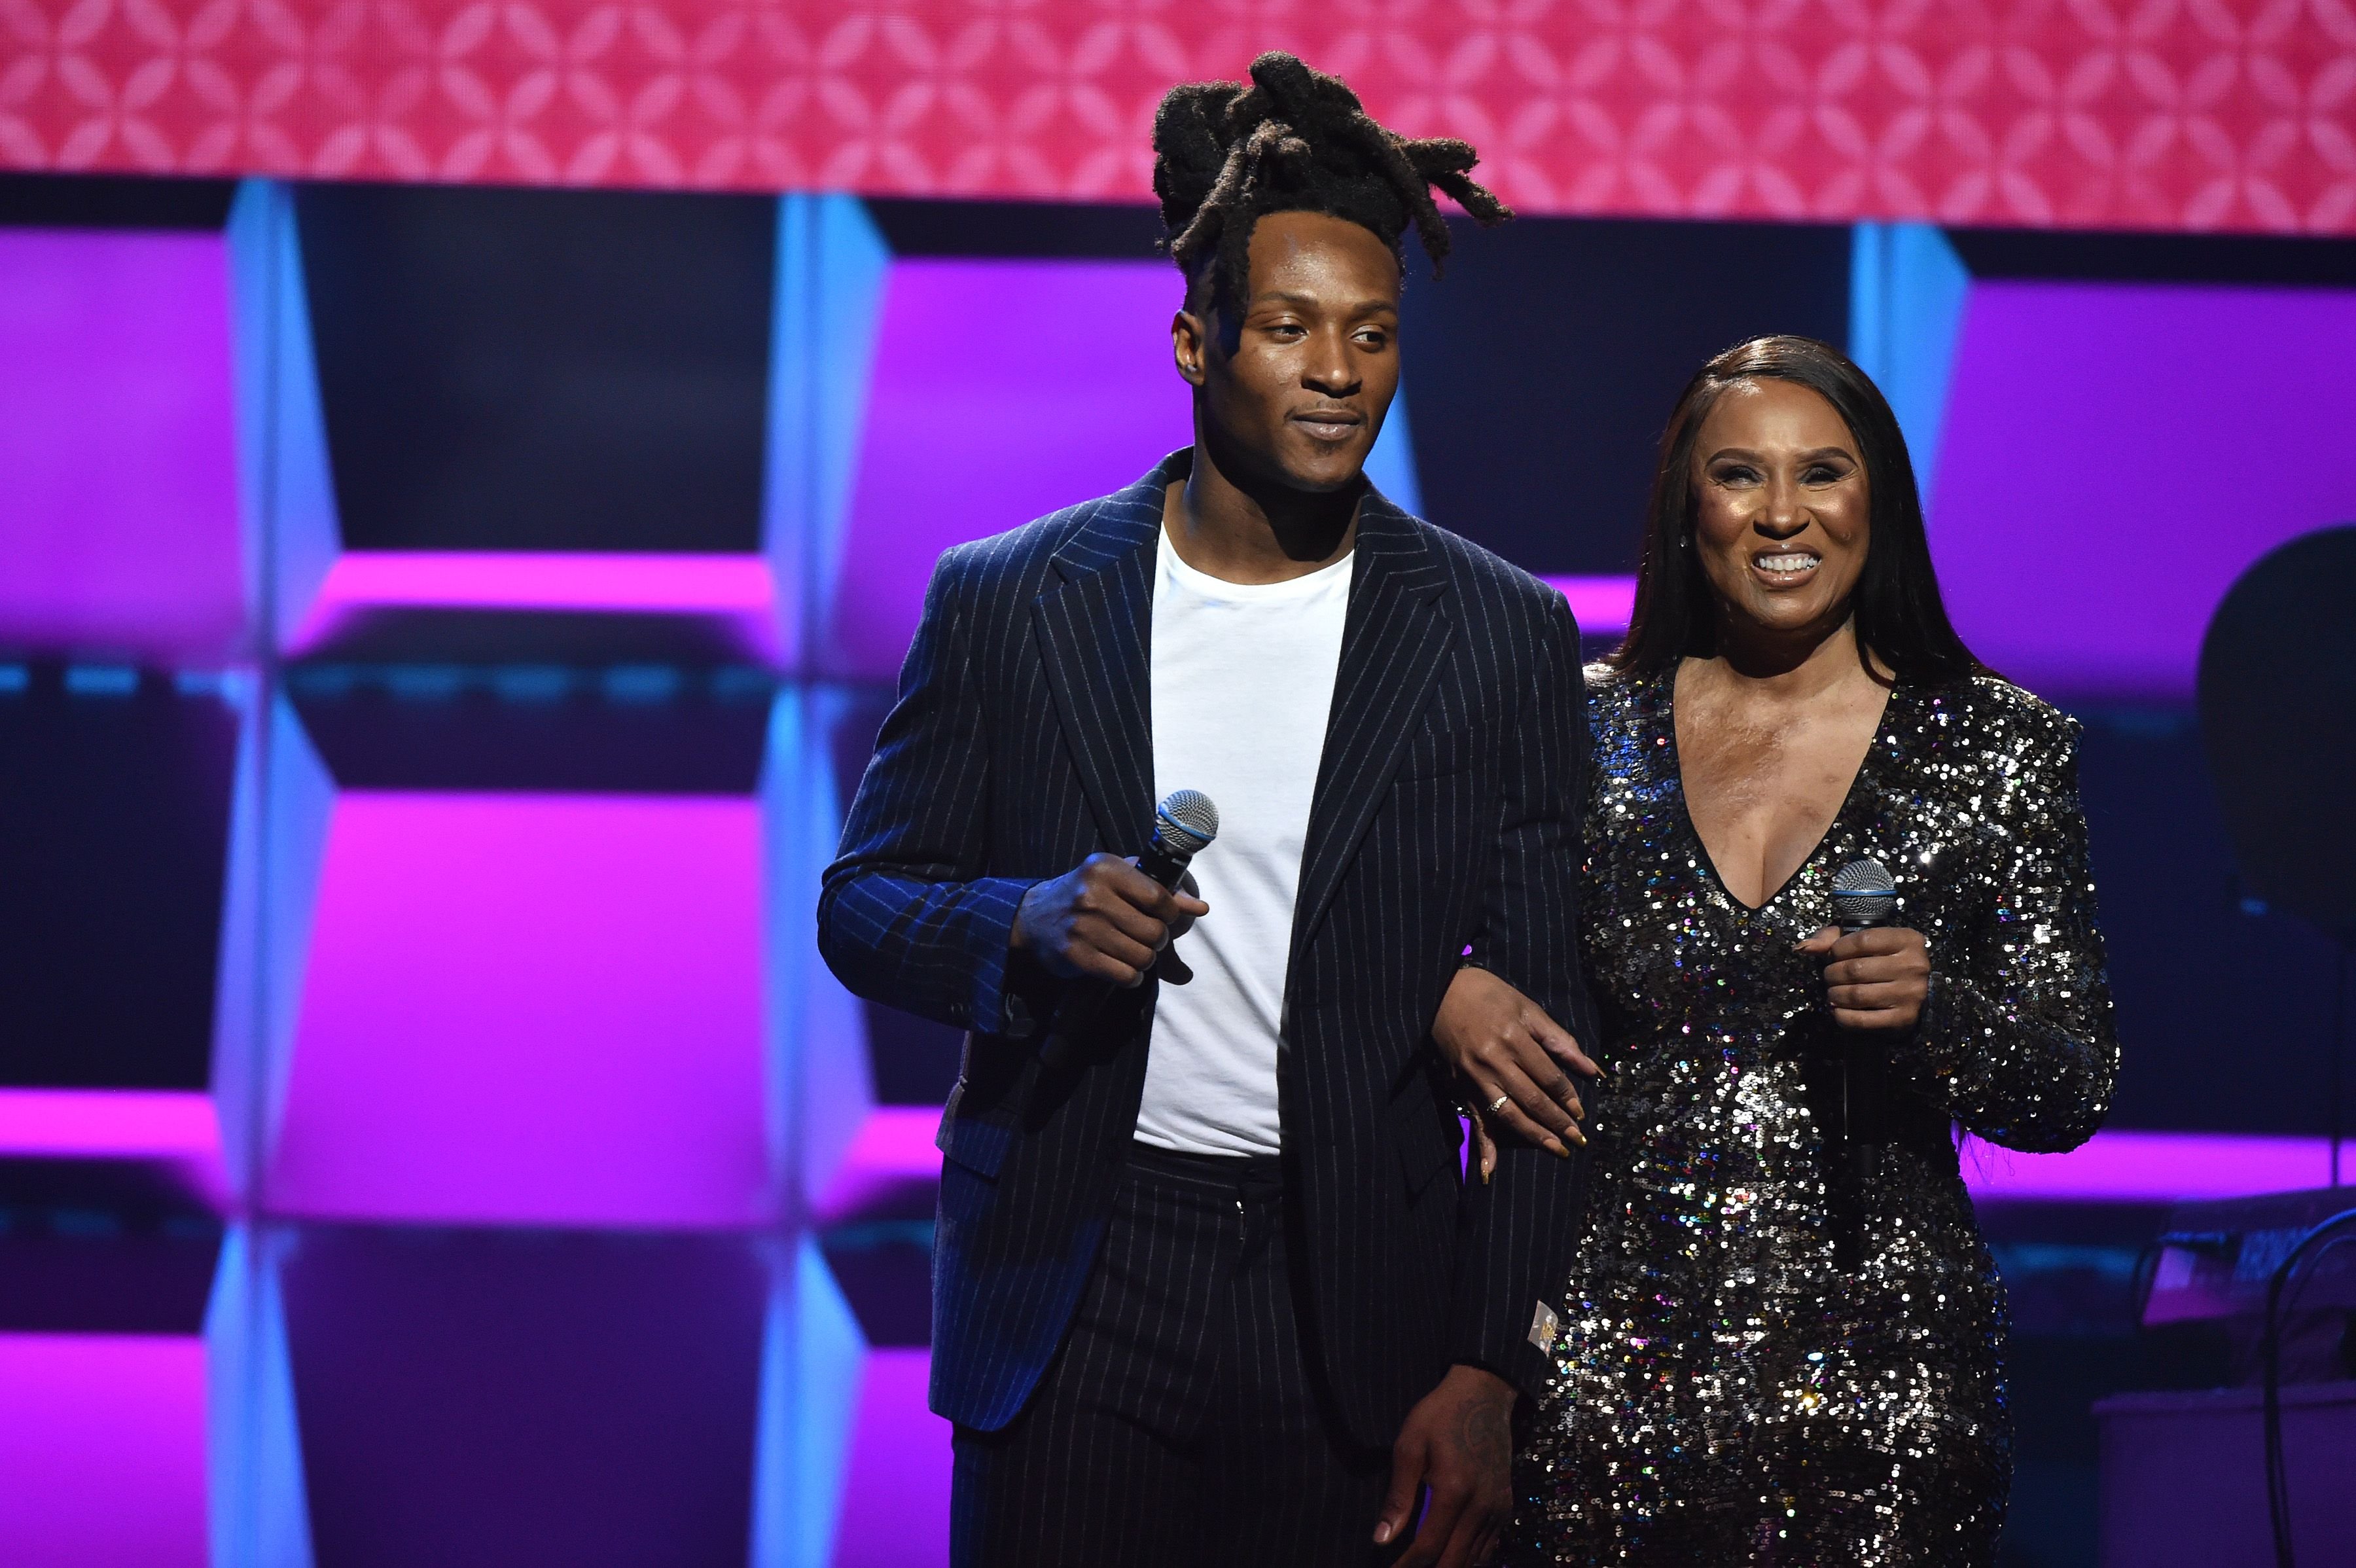 DeAndre Hopkins and Sabrina Greenlee onstage during the BET Super Bowl Gospel Celebration in January 2020 in Miami, Florida | Source: Getty Images